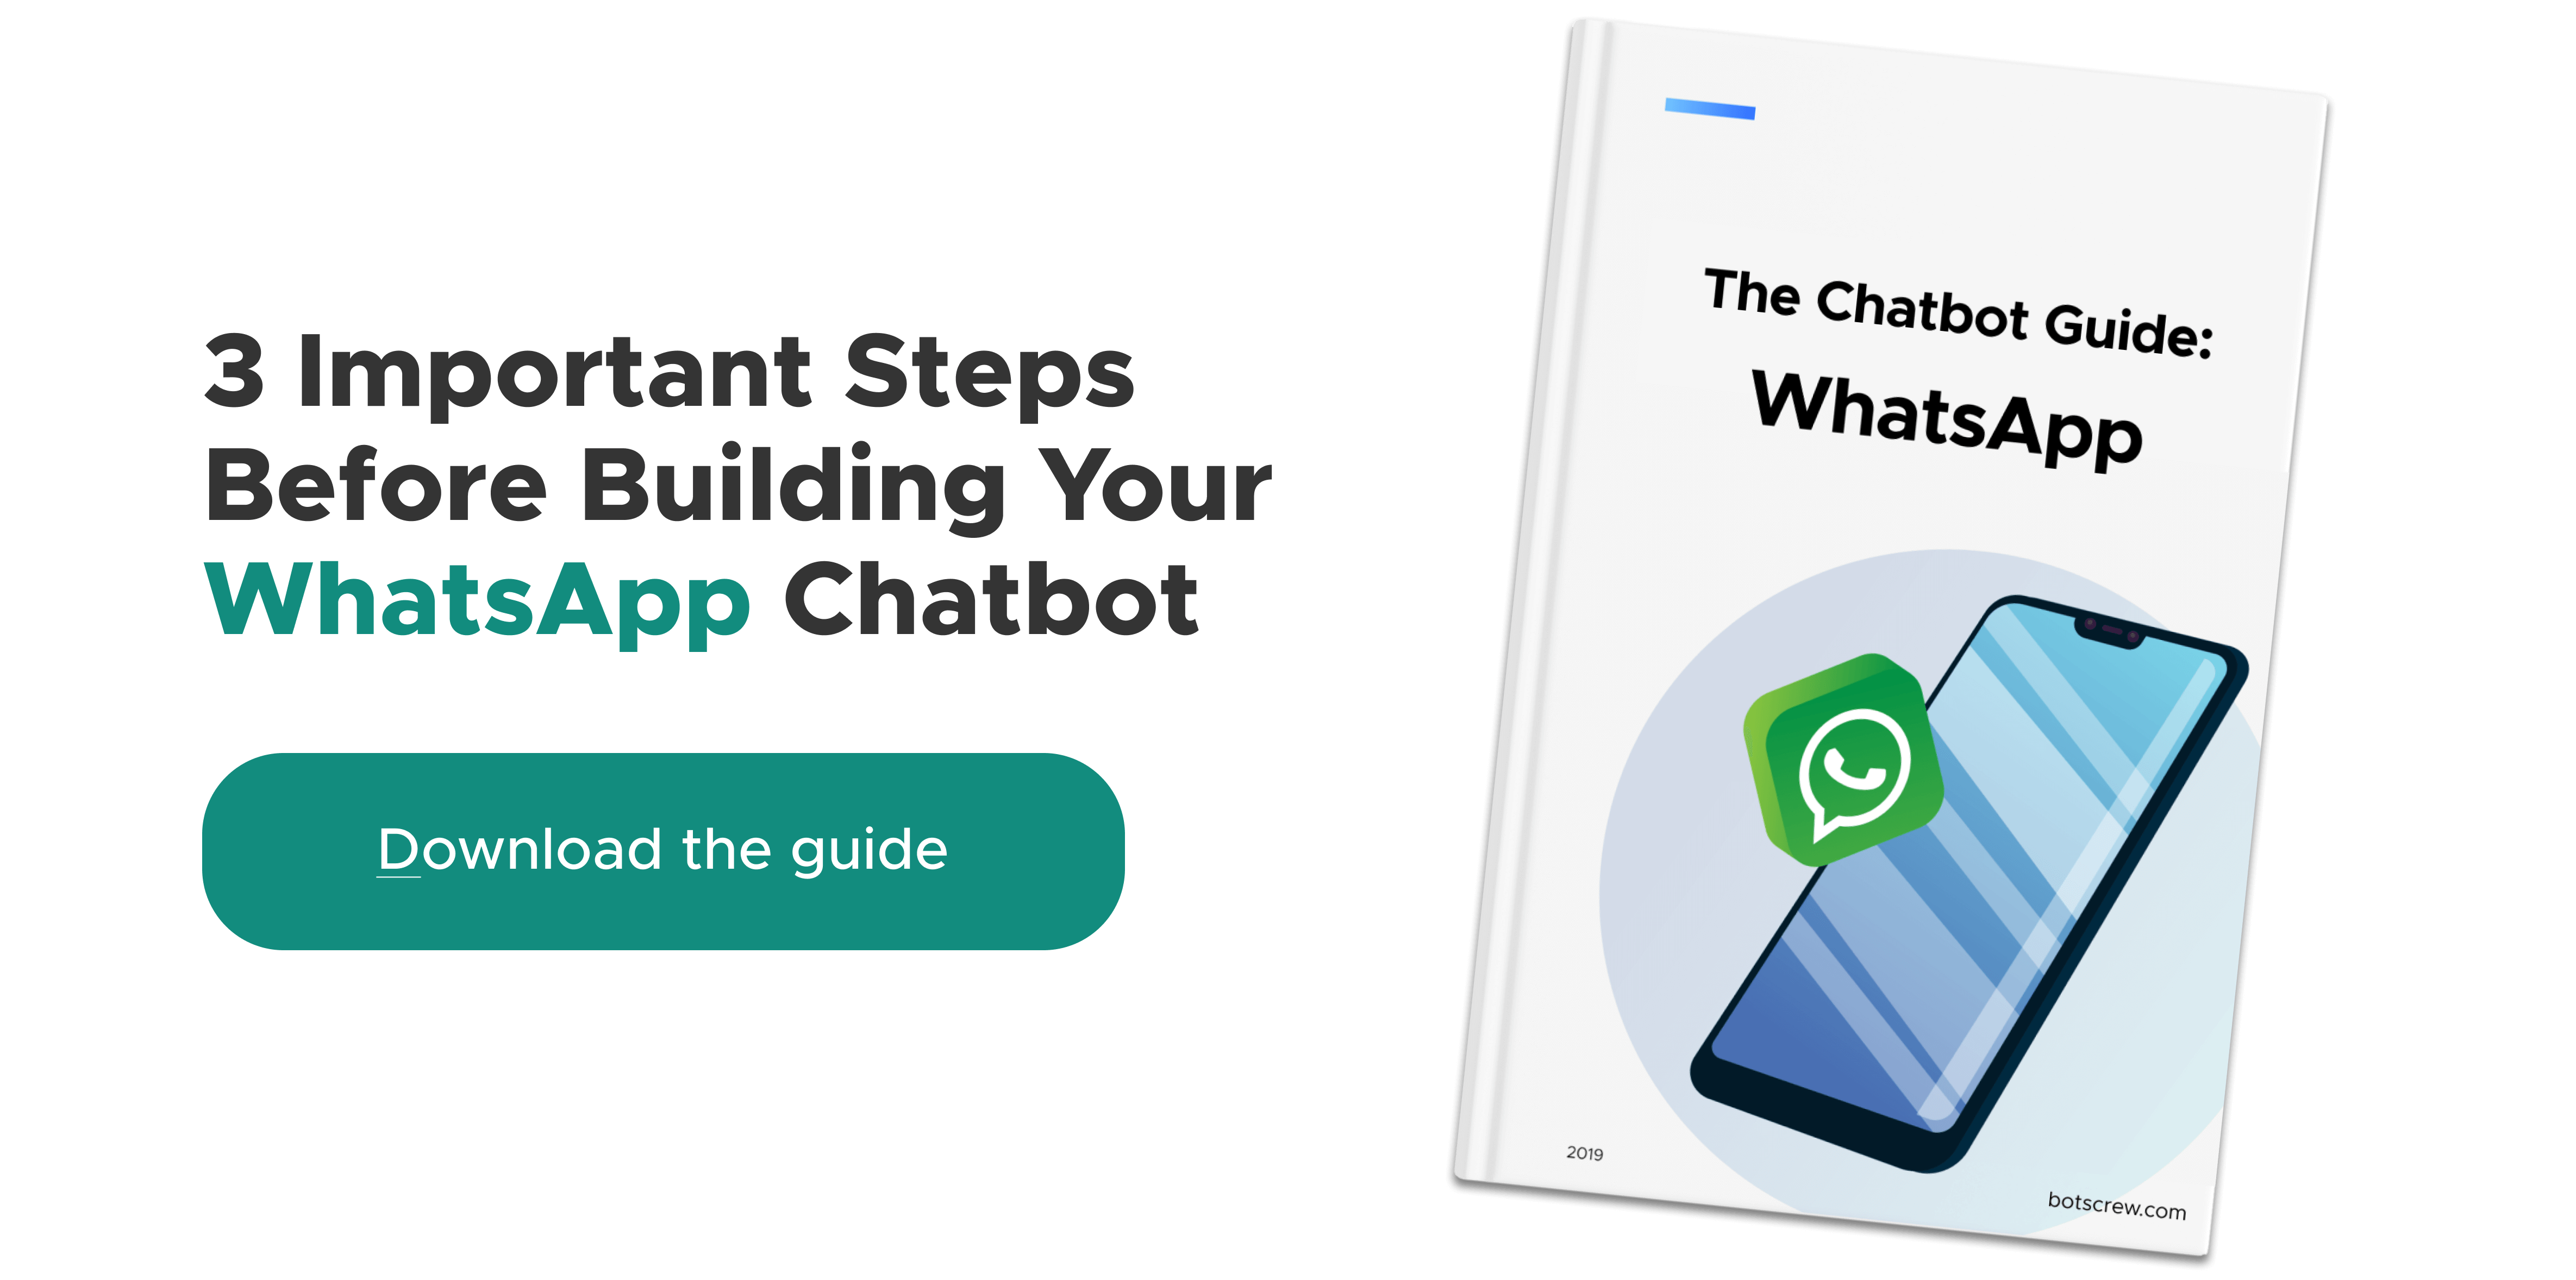 Guide to WhatsApp Chatbots